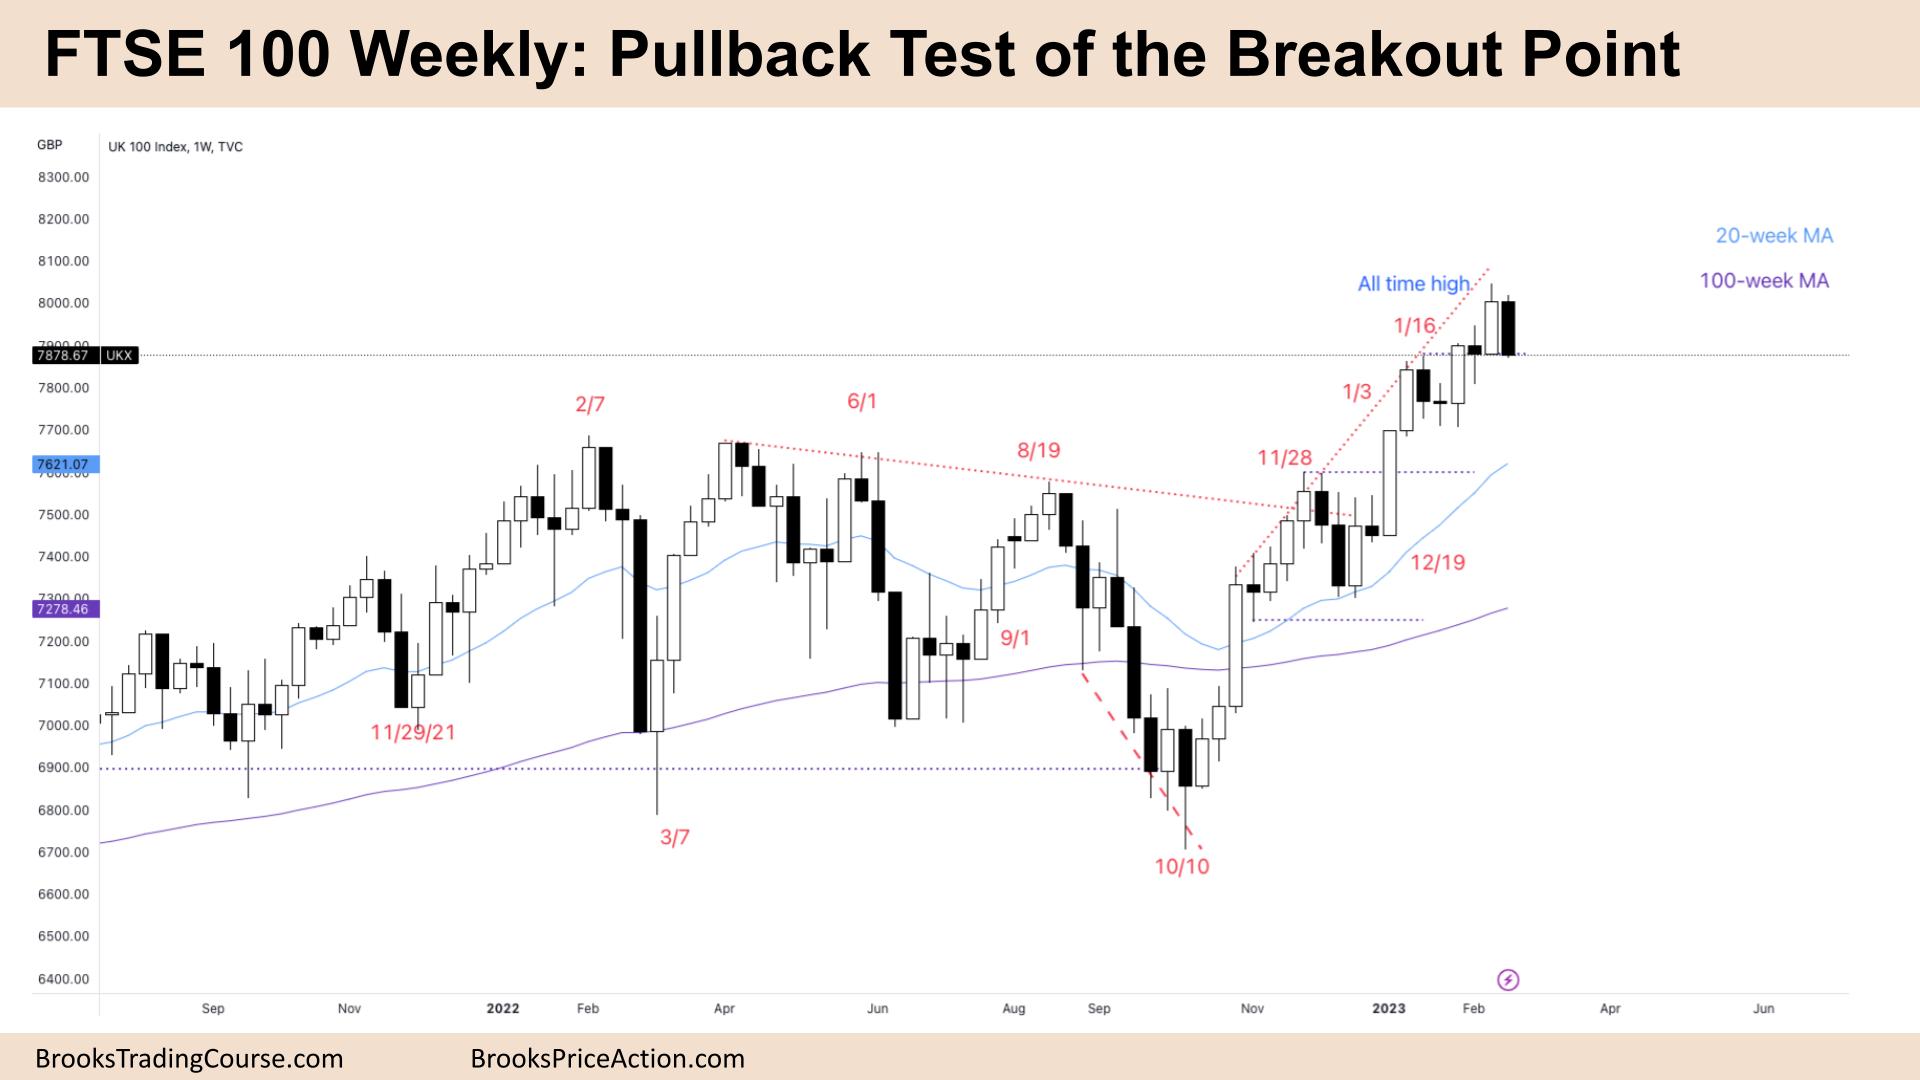 FTSE 100 Big Pullback Test of the Breakout Point